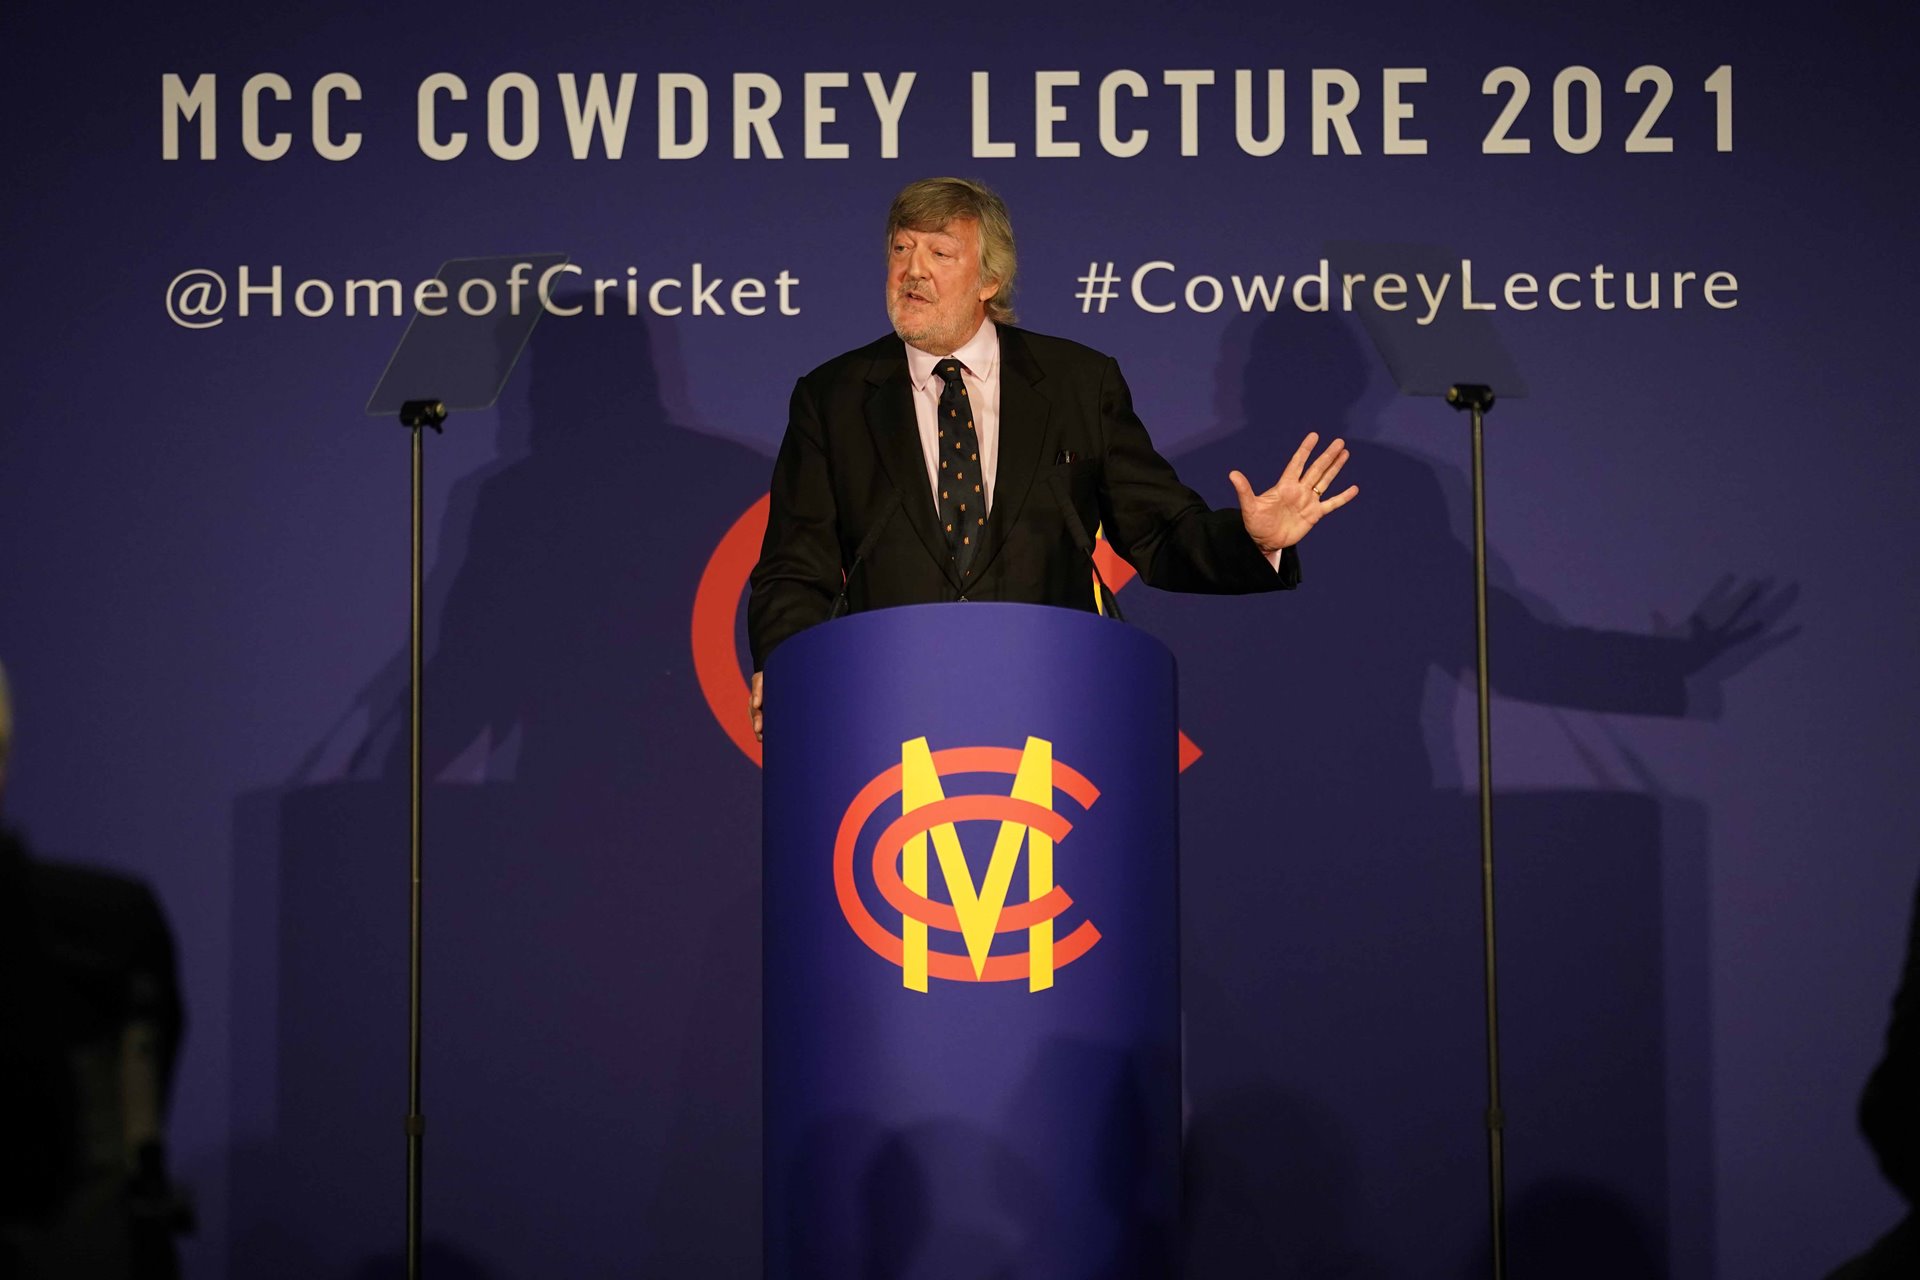 Mark Nicholas recommended to Members as next Chair of MCC